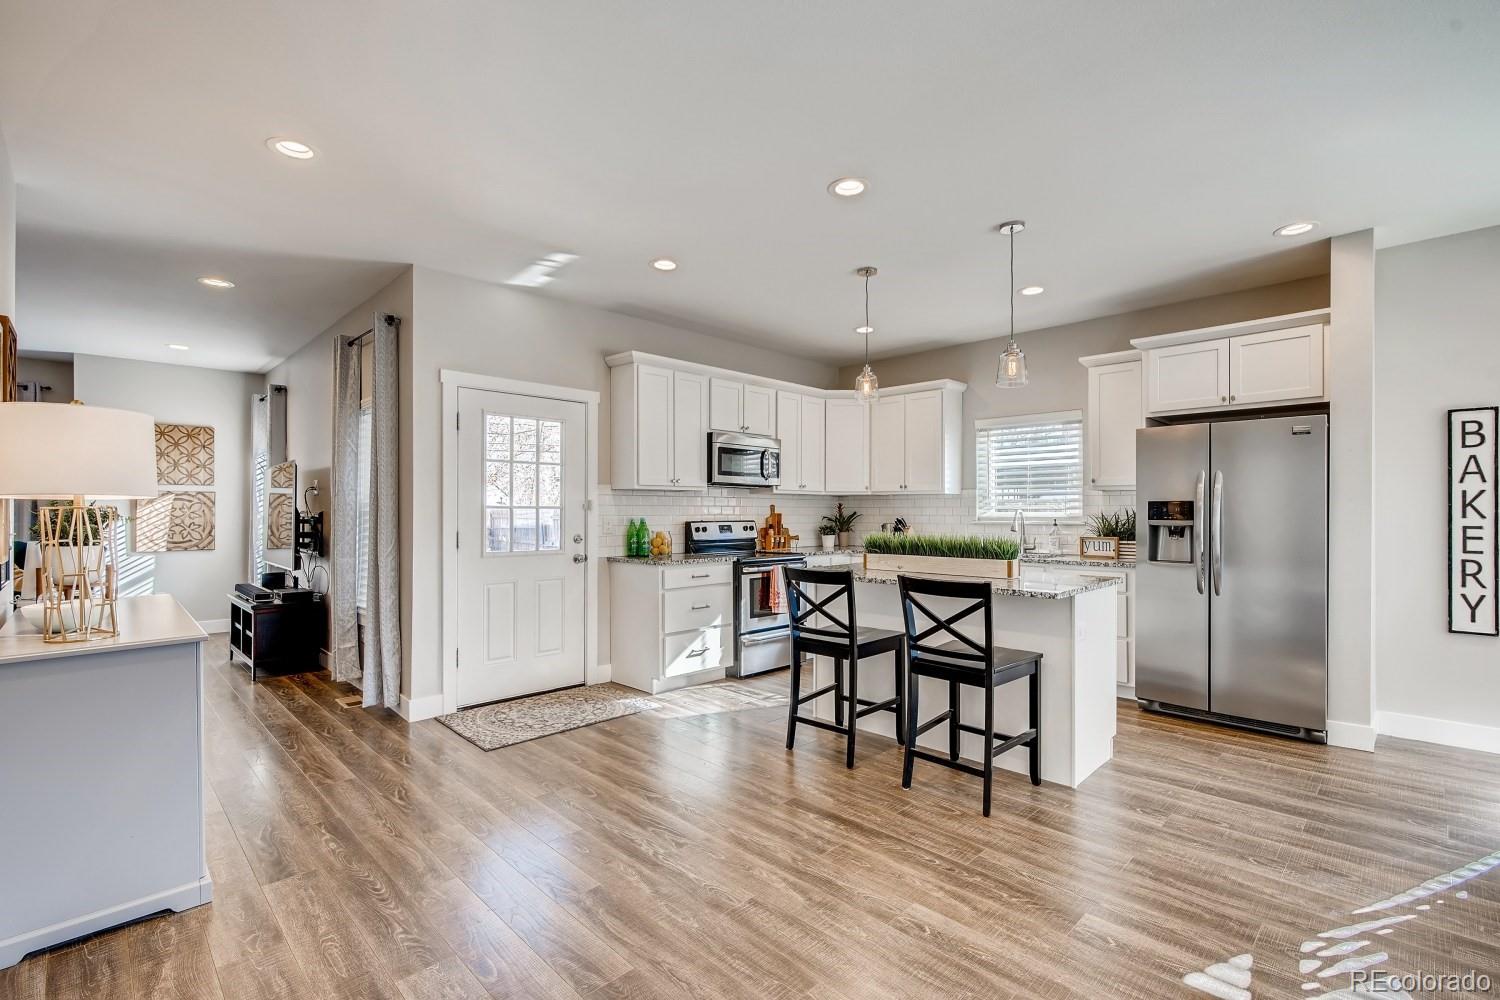 Stunning Kitchen offers All the Stainless Appliances, Granite Counters, Soft Close Cabinets and Drawers, Breakfast Nook and Large Stainless Sink.